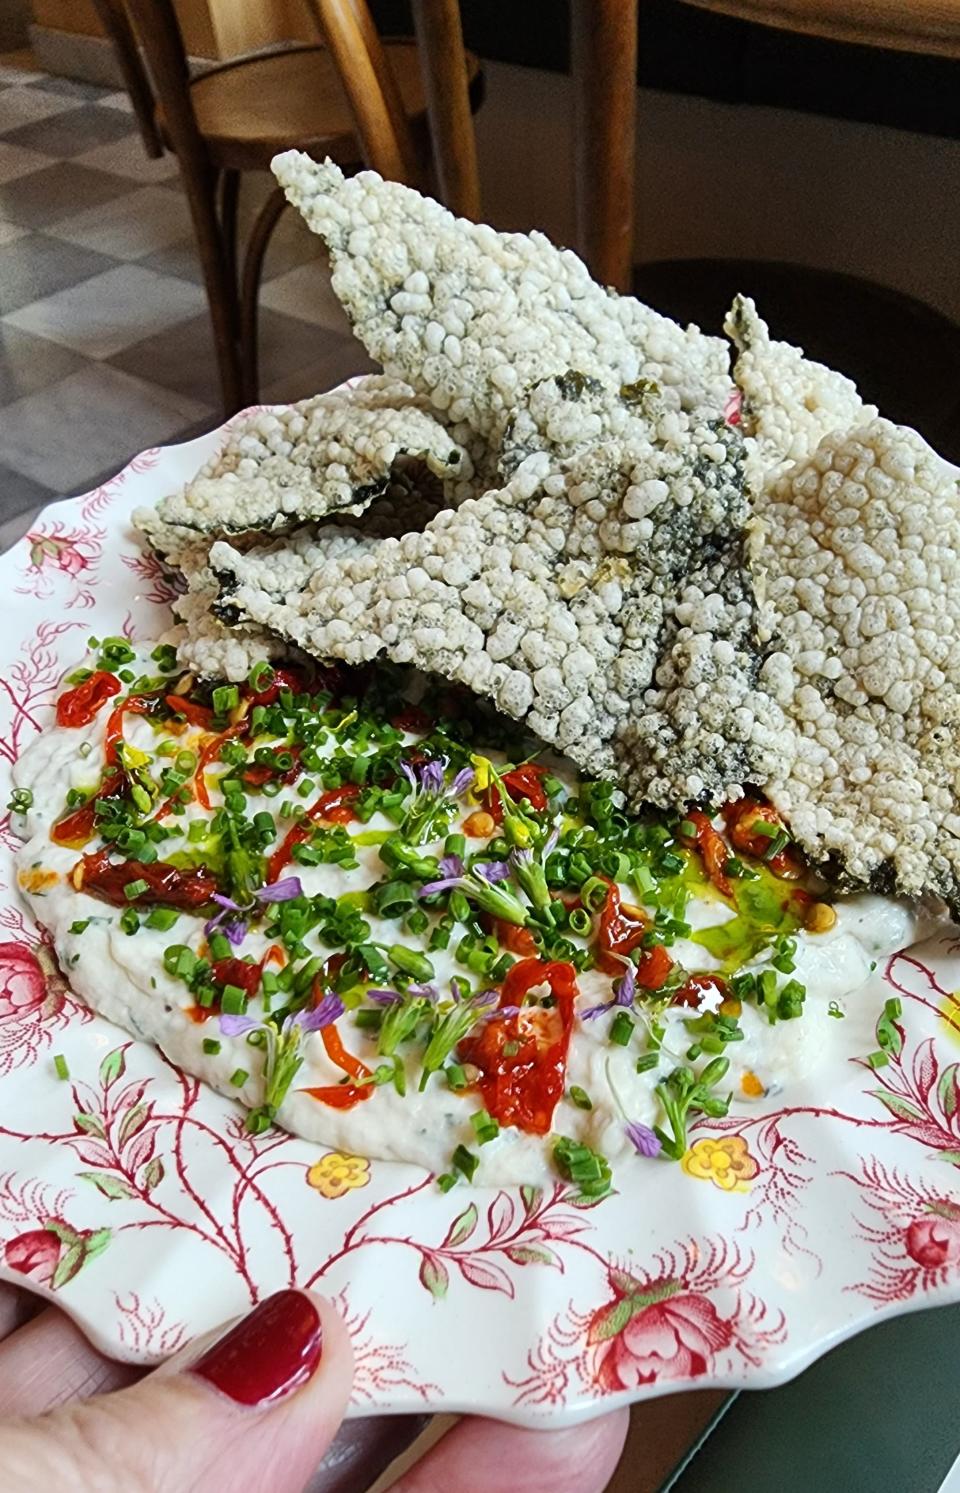 The Smoked Fish Dip with Preserved Calabrian Peppers is served with Puffed Nori Chips at Gift Horse.